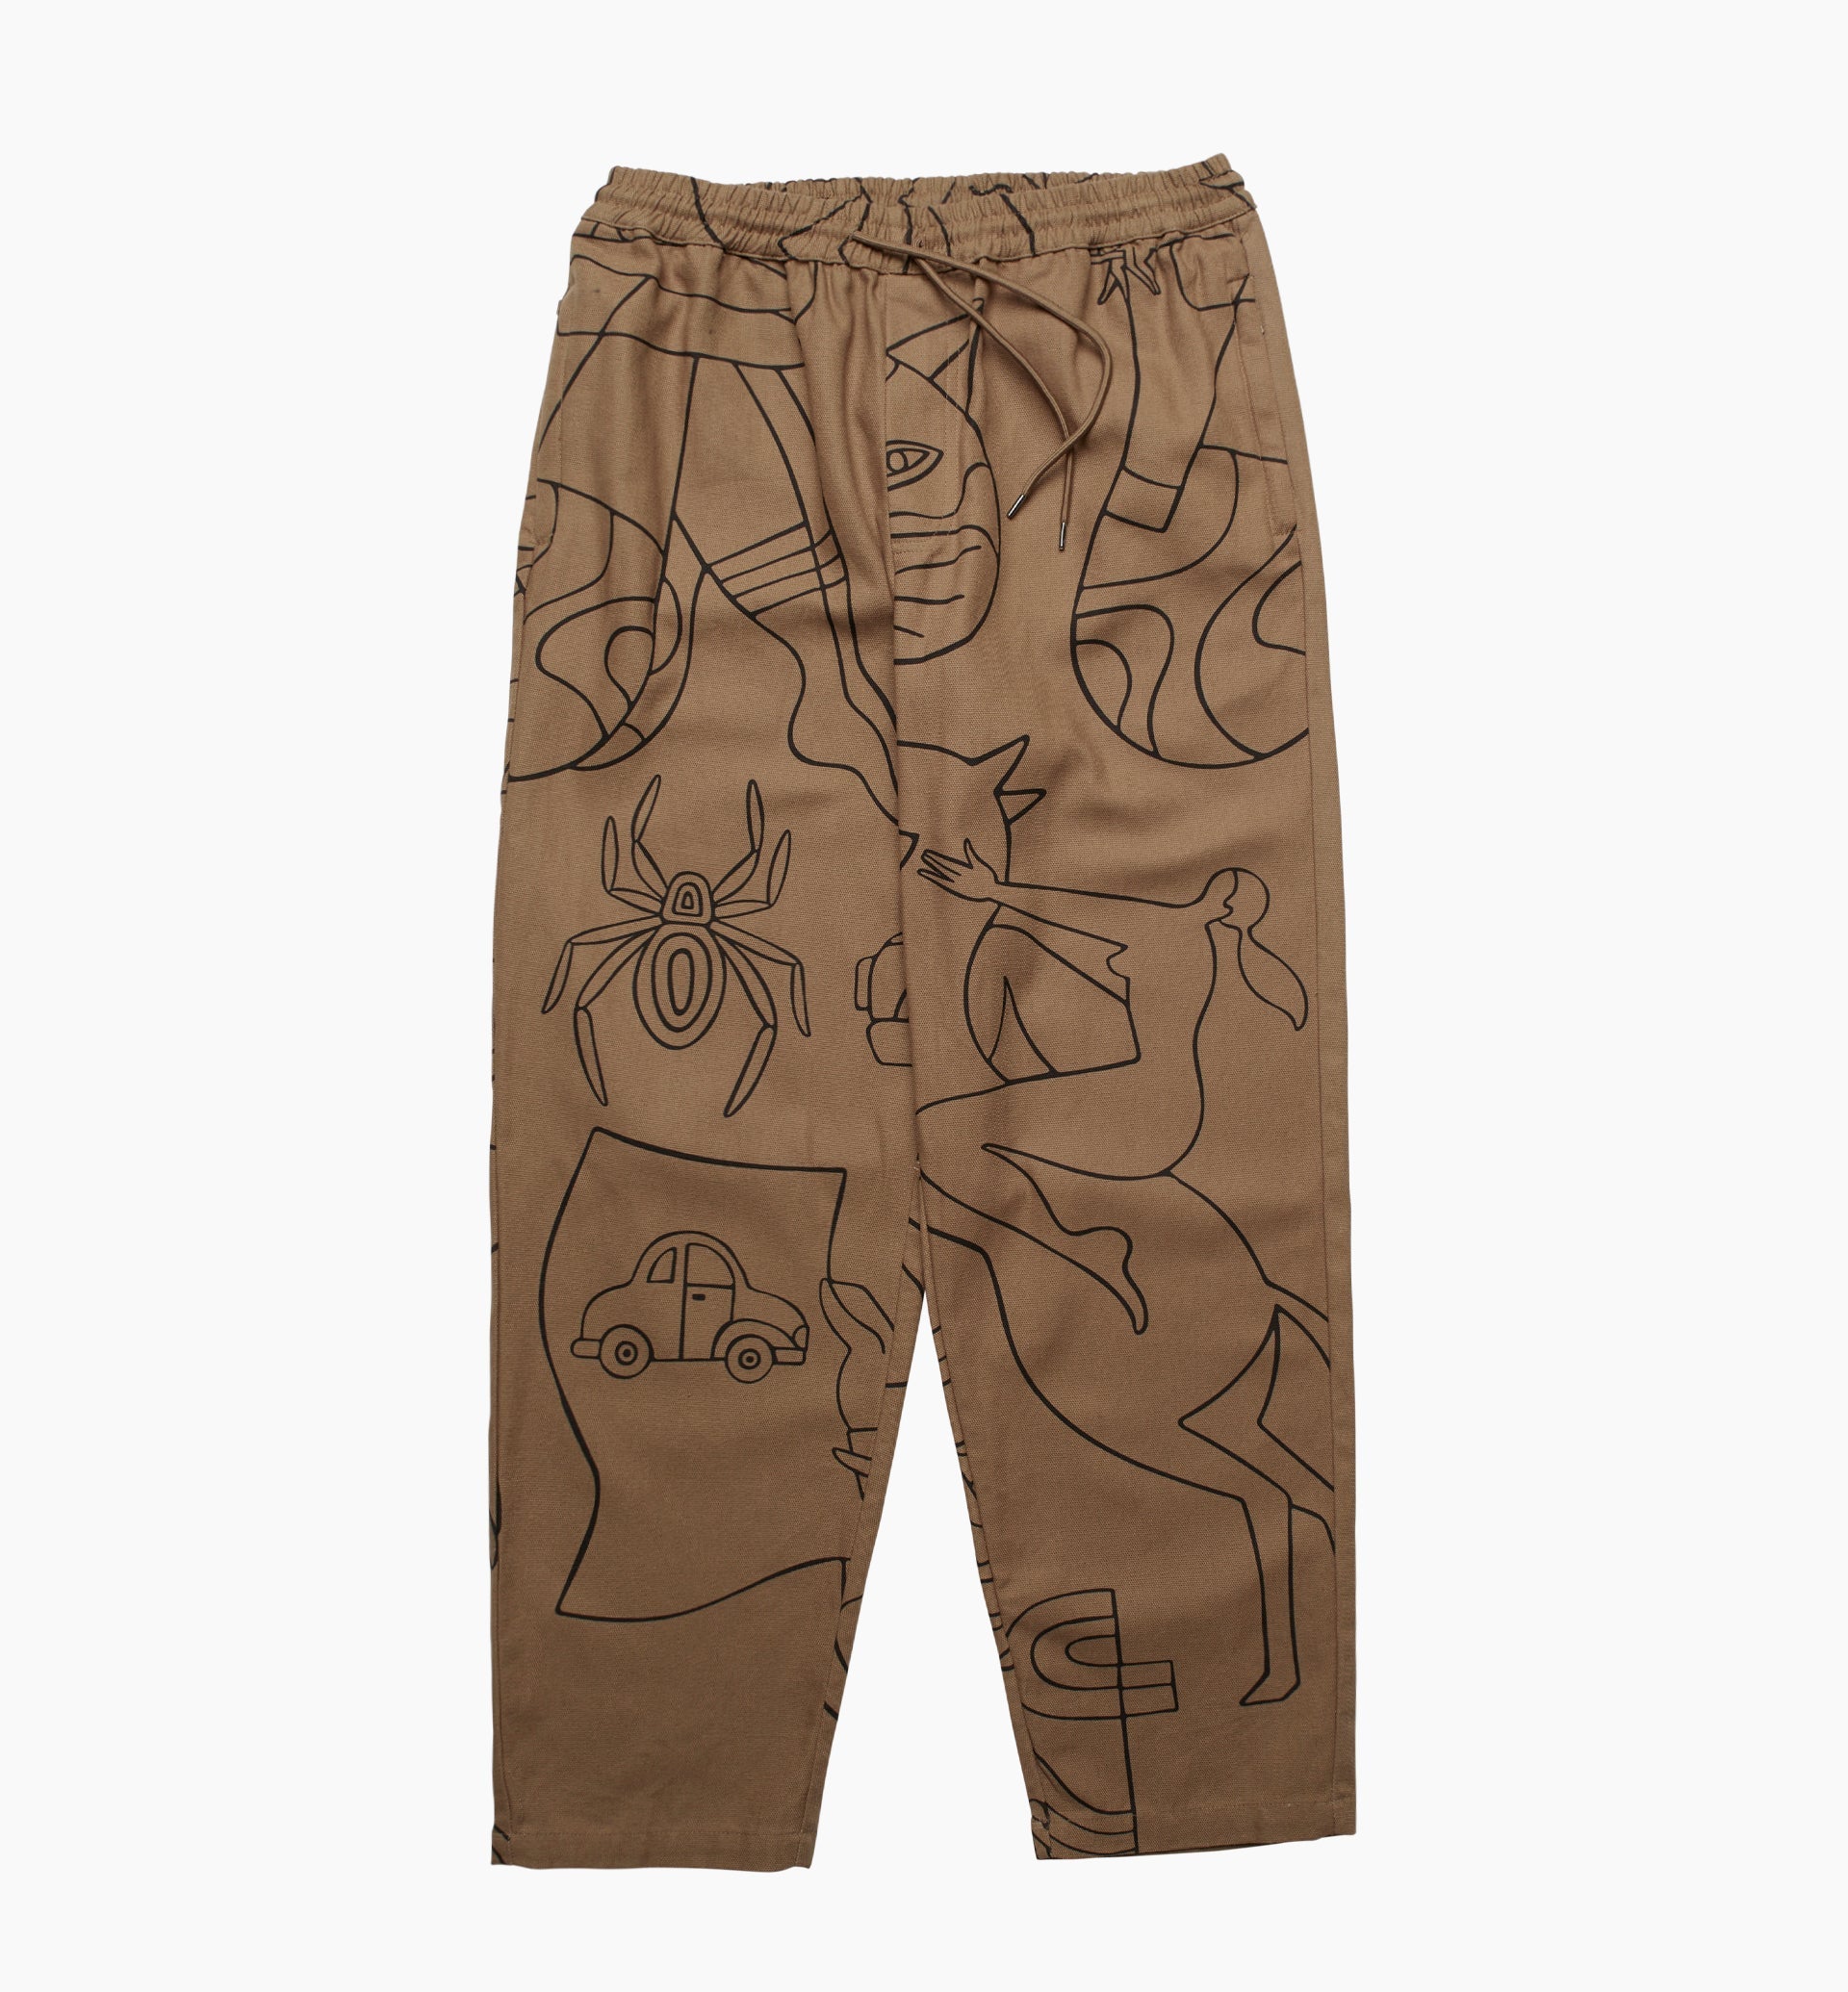 Parra - experience life worker pants